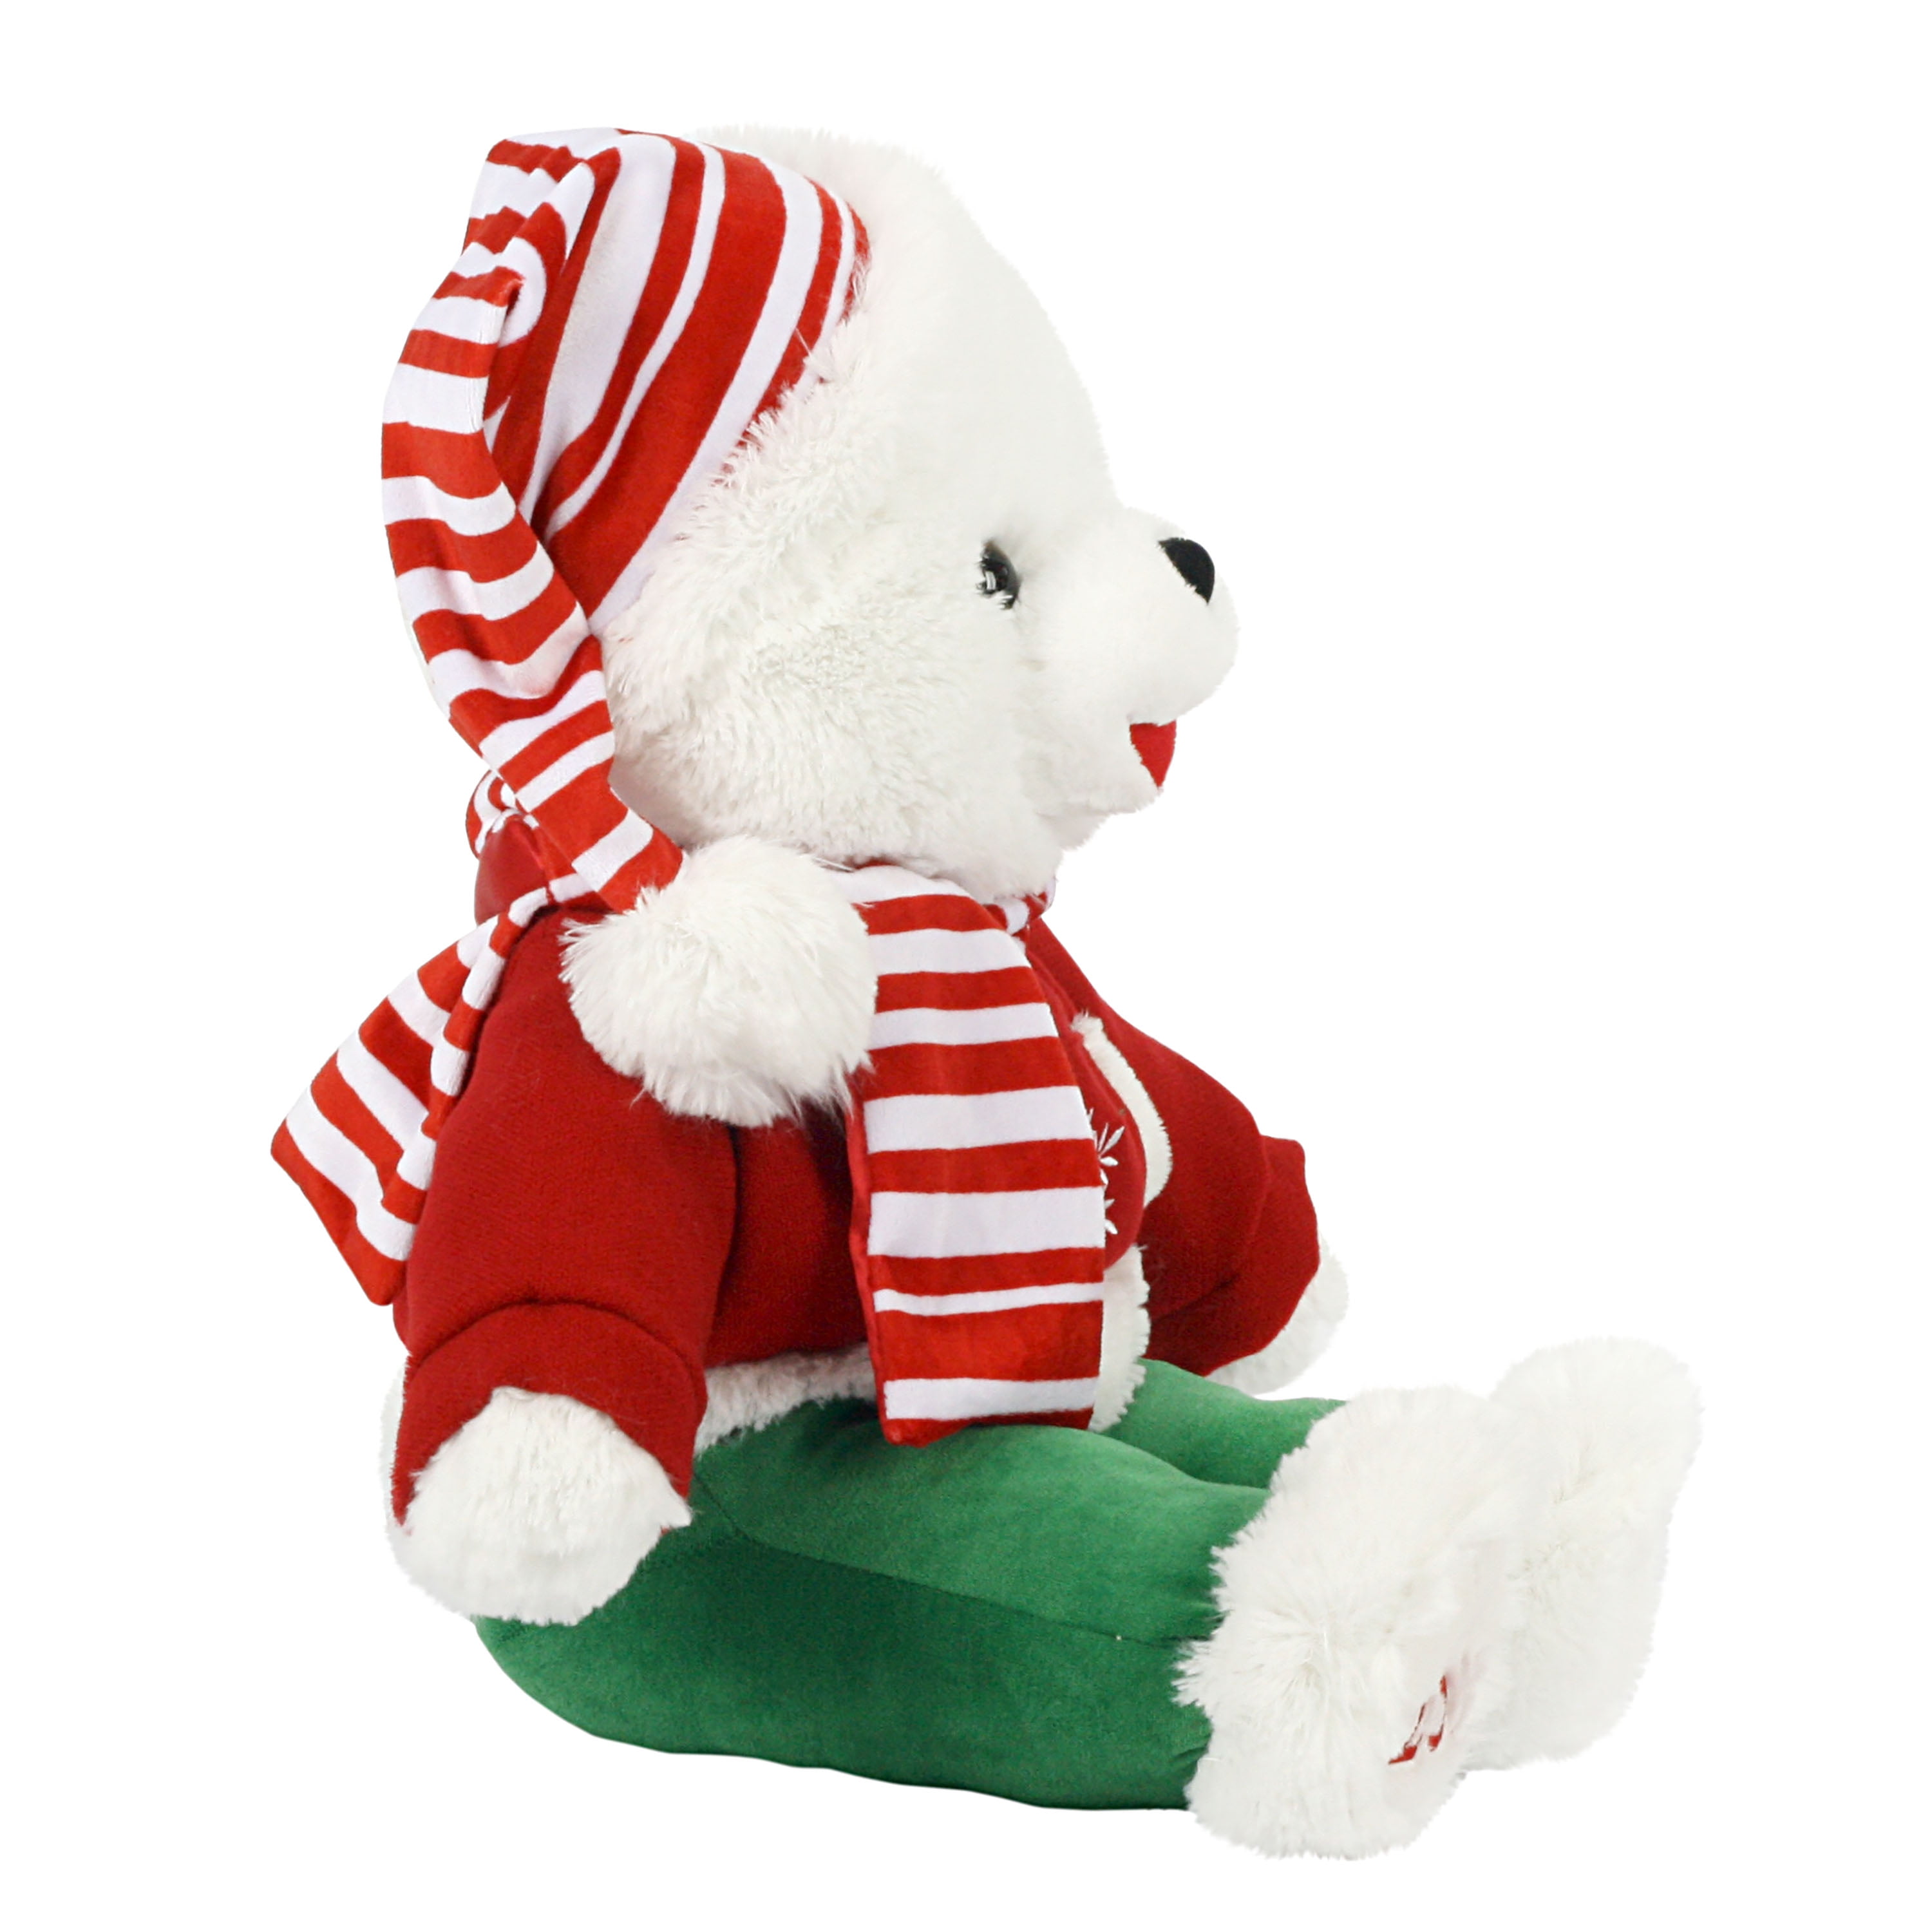 2012 WalMART CHRISTMAS Snowflake TEDDY BEAR White Boy 20" Red Cothes Great New 